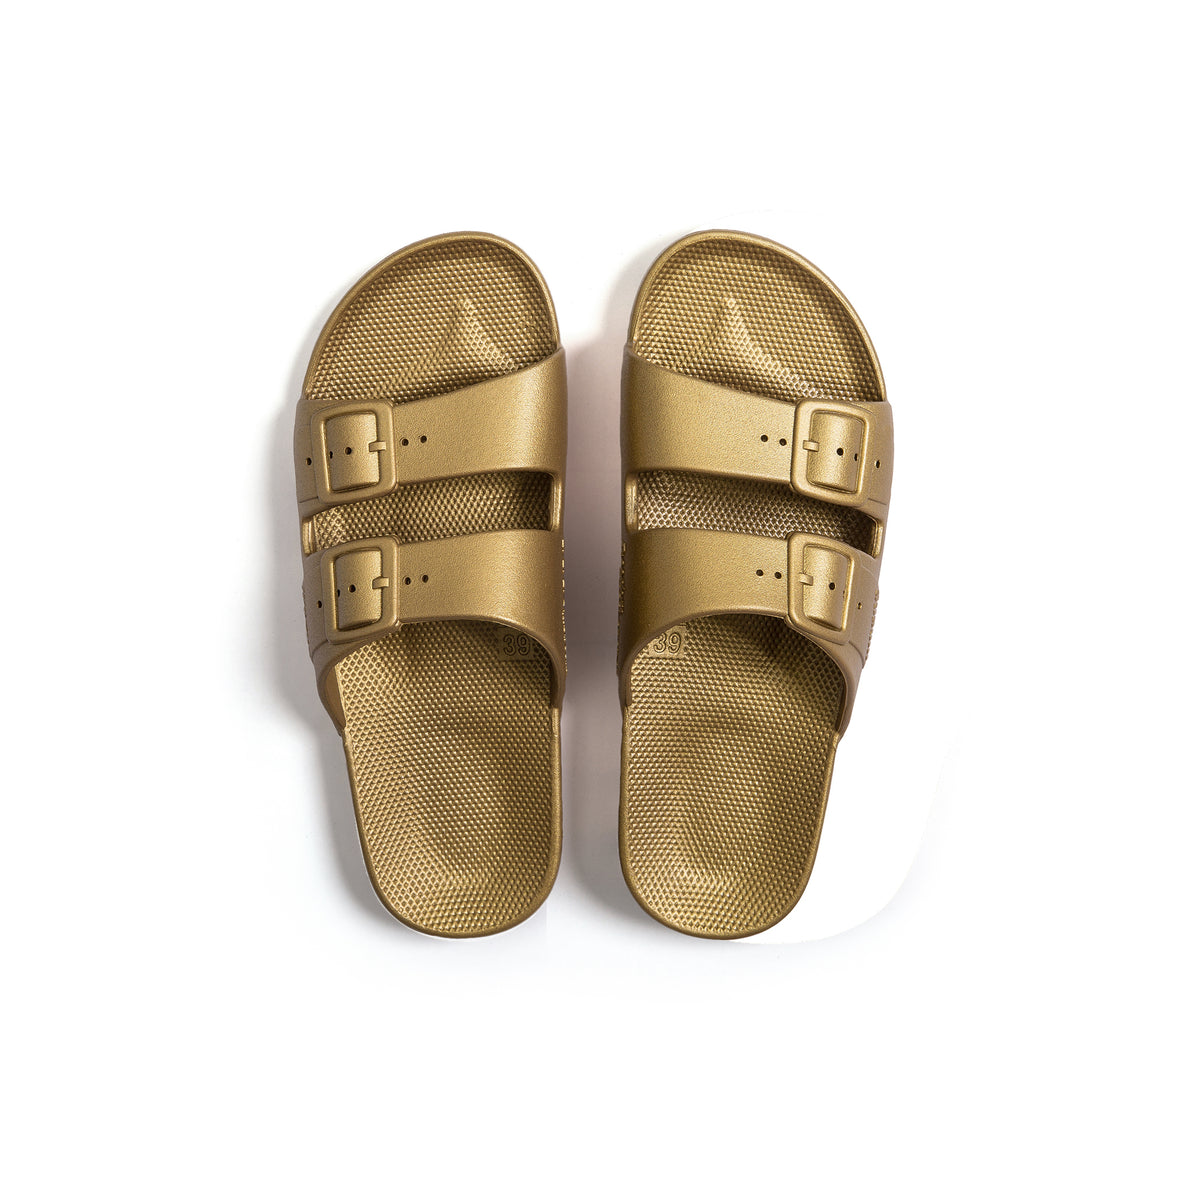 Parallel Culture Shoes and Fashion Online SLIDES FREEDOM MOSES FM METALLICS SLIDES